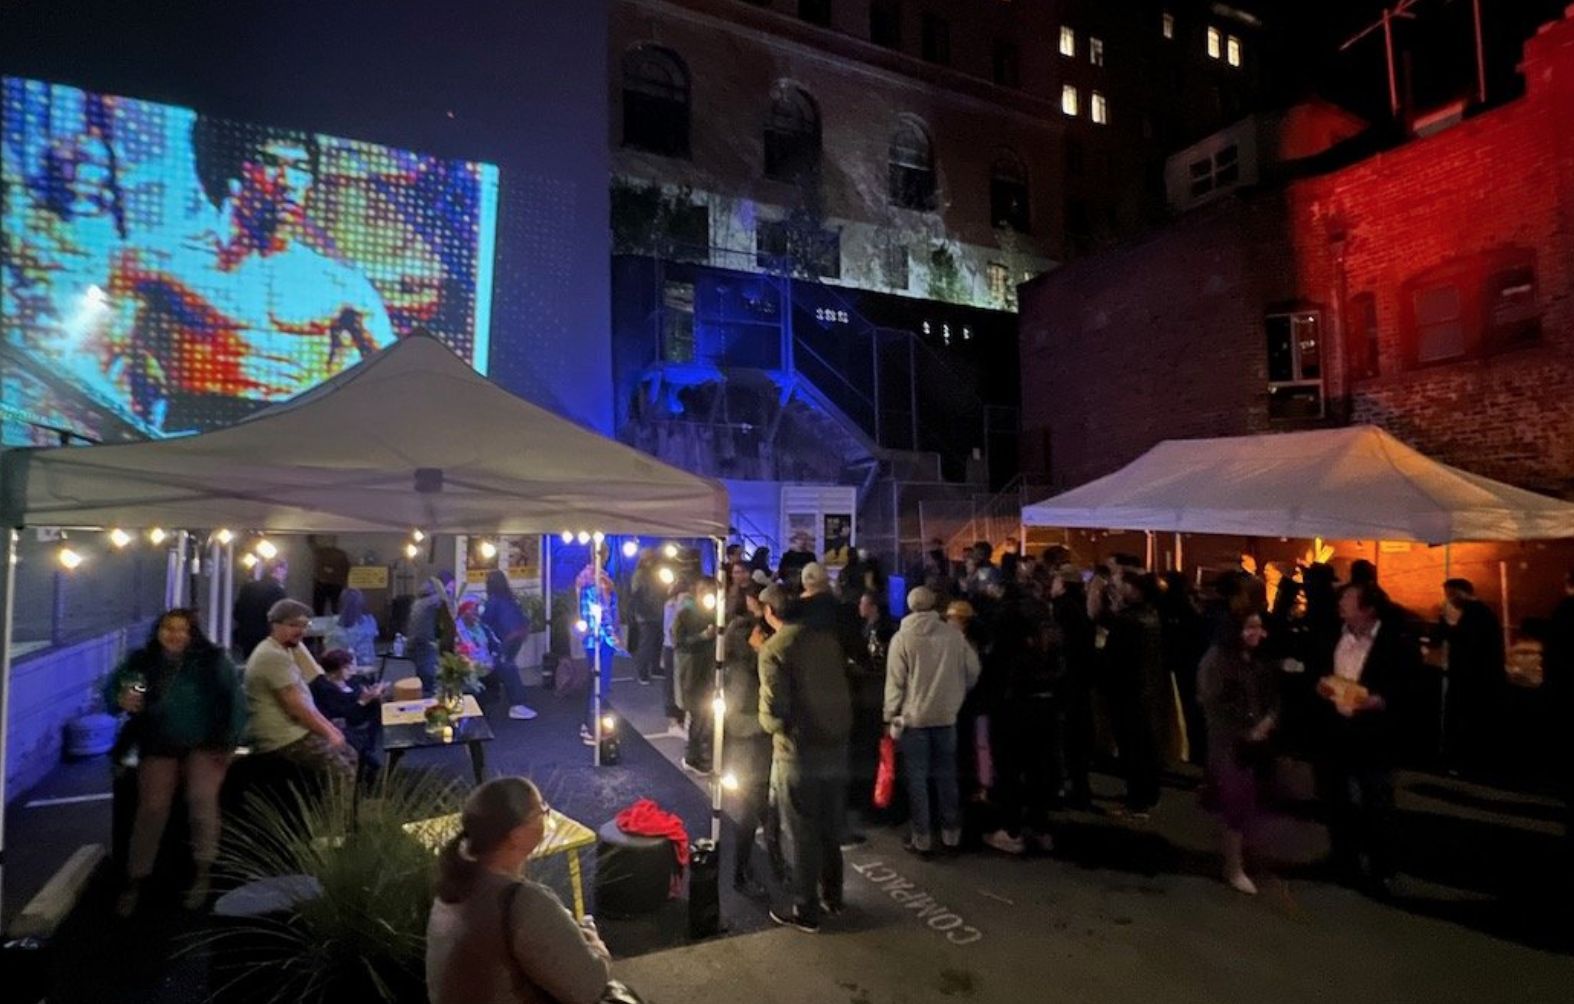 Golden Gate Girls: Outdoor film screening and discussion in San Francisco Chinatown, San Francisco, California, United States